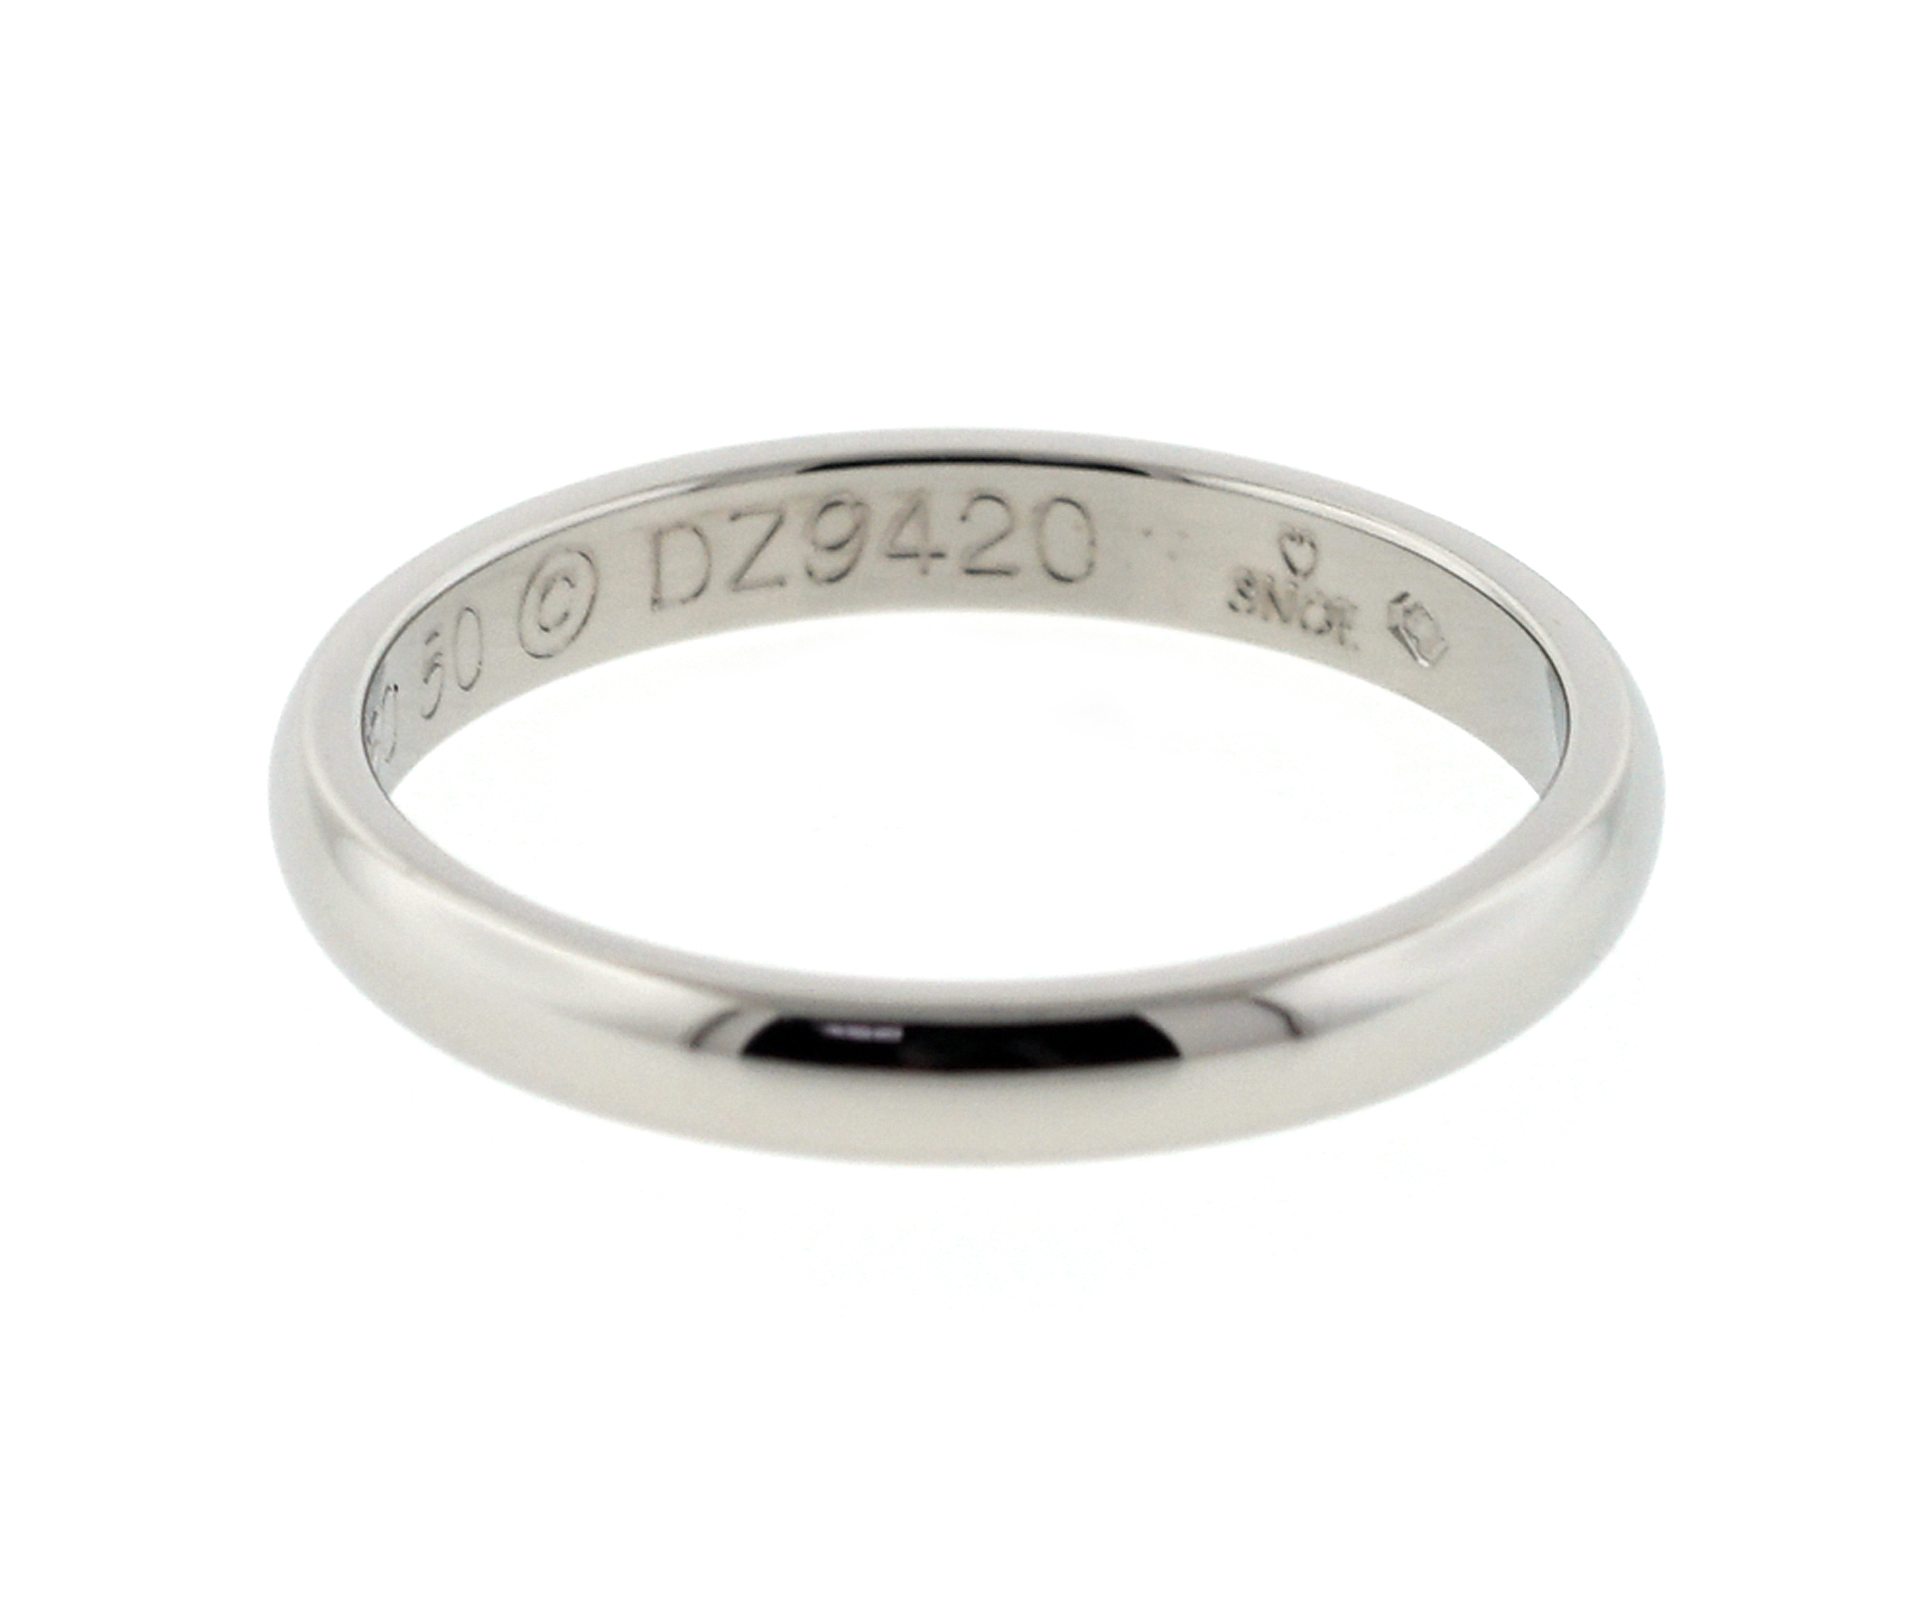 Cartier Classic Wedding Band in Platinum | New York Jewelers Chicago